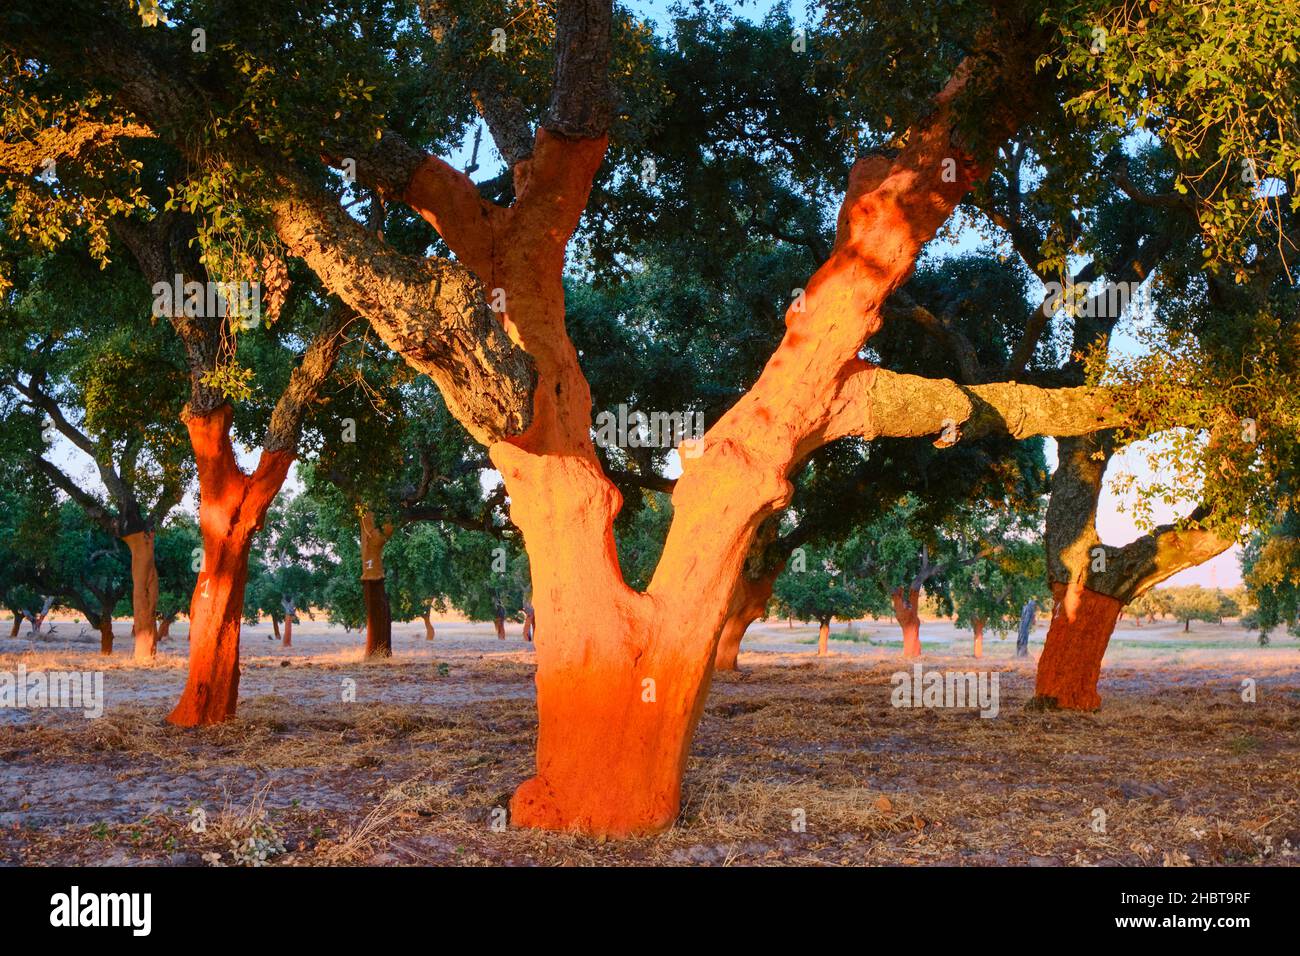 A cork tree with the cork recently cut off. Portugal is the world leader of cork production. Palmela, Portugal Stock Photo